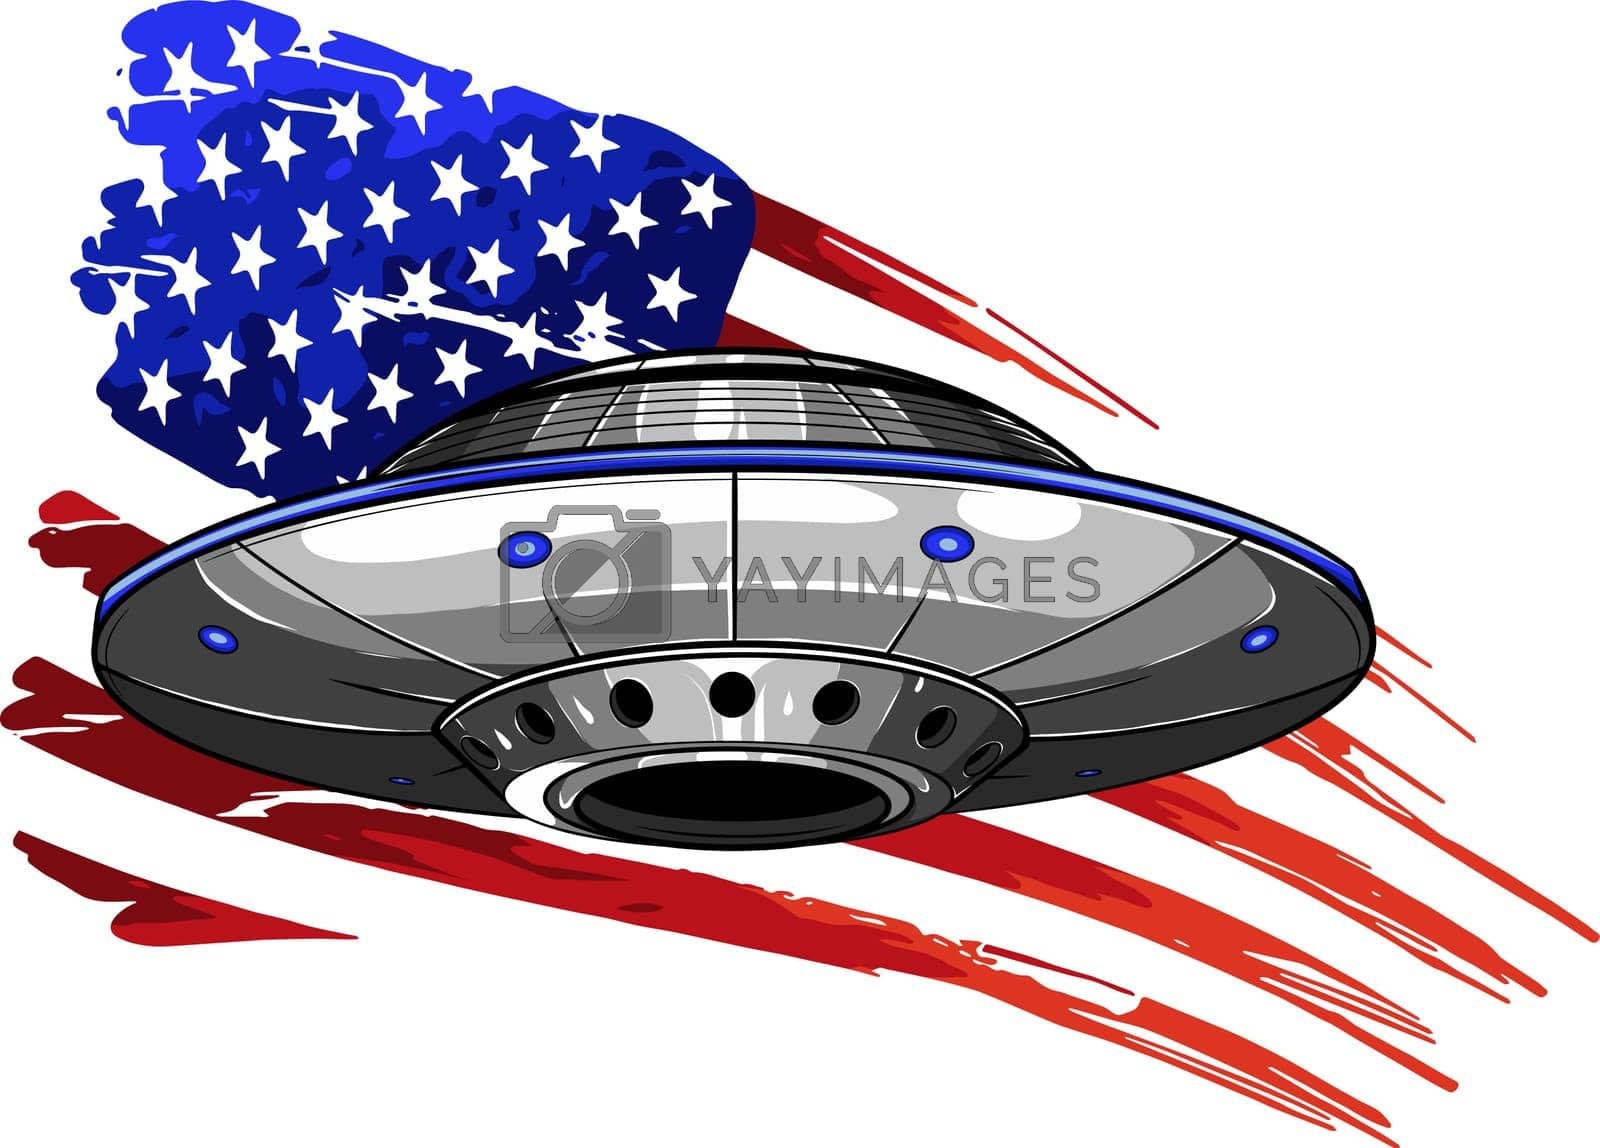 Royalty free image of ufo with usa flag in backgrond vector by dean